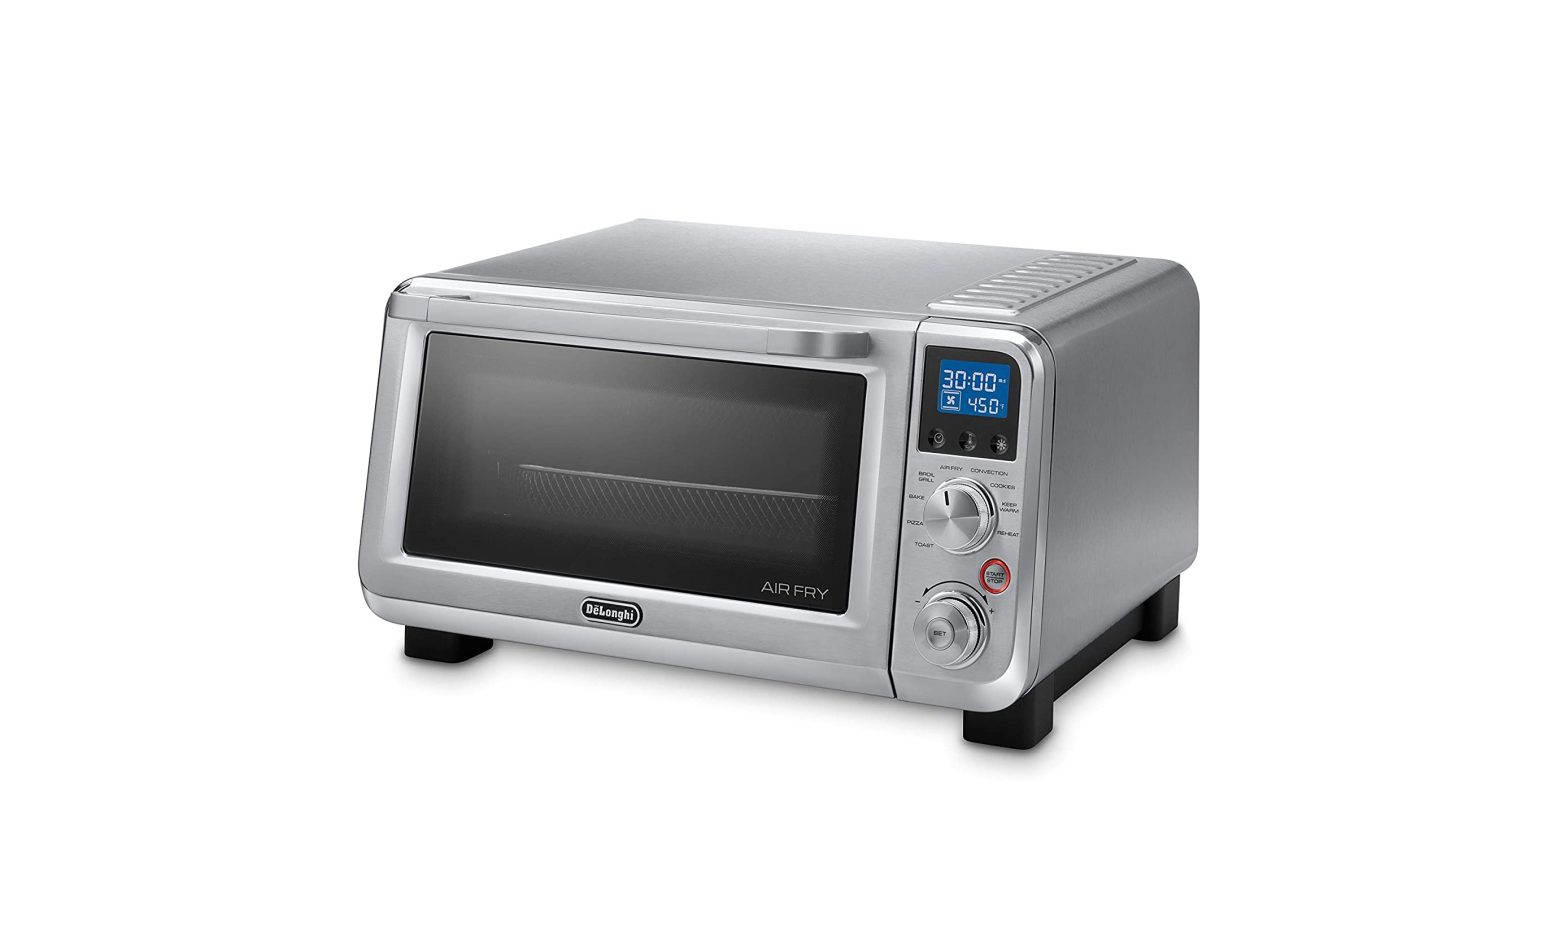 DeLonghi EO141164M Livenza 9-in-1 Digital Air Fry Convection Toaster Oven User Guide